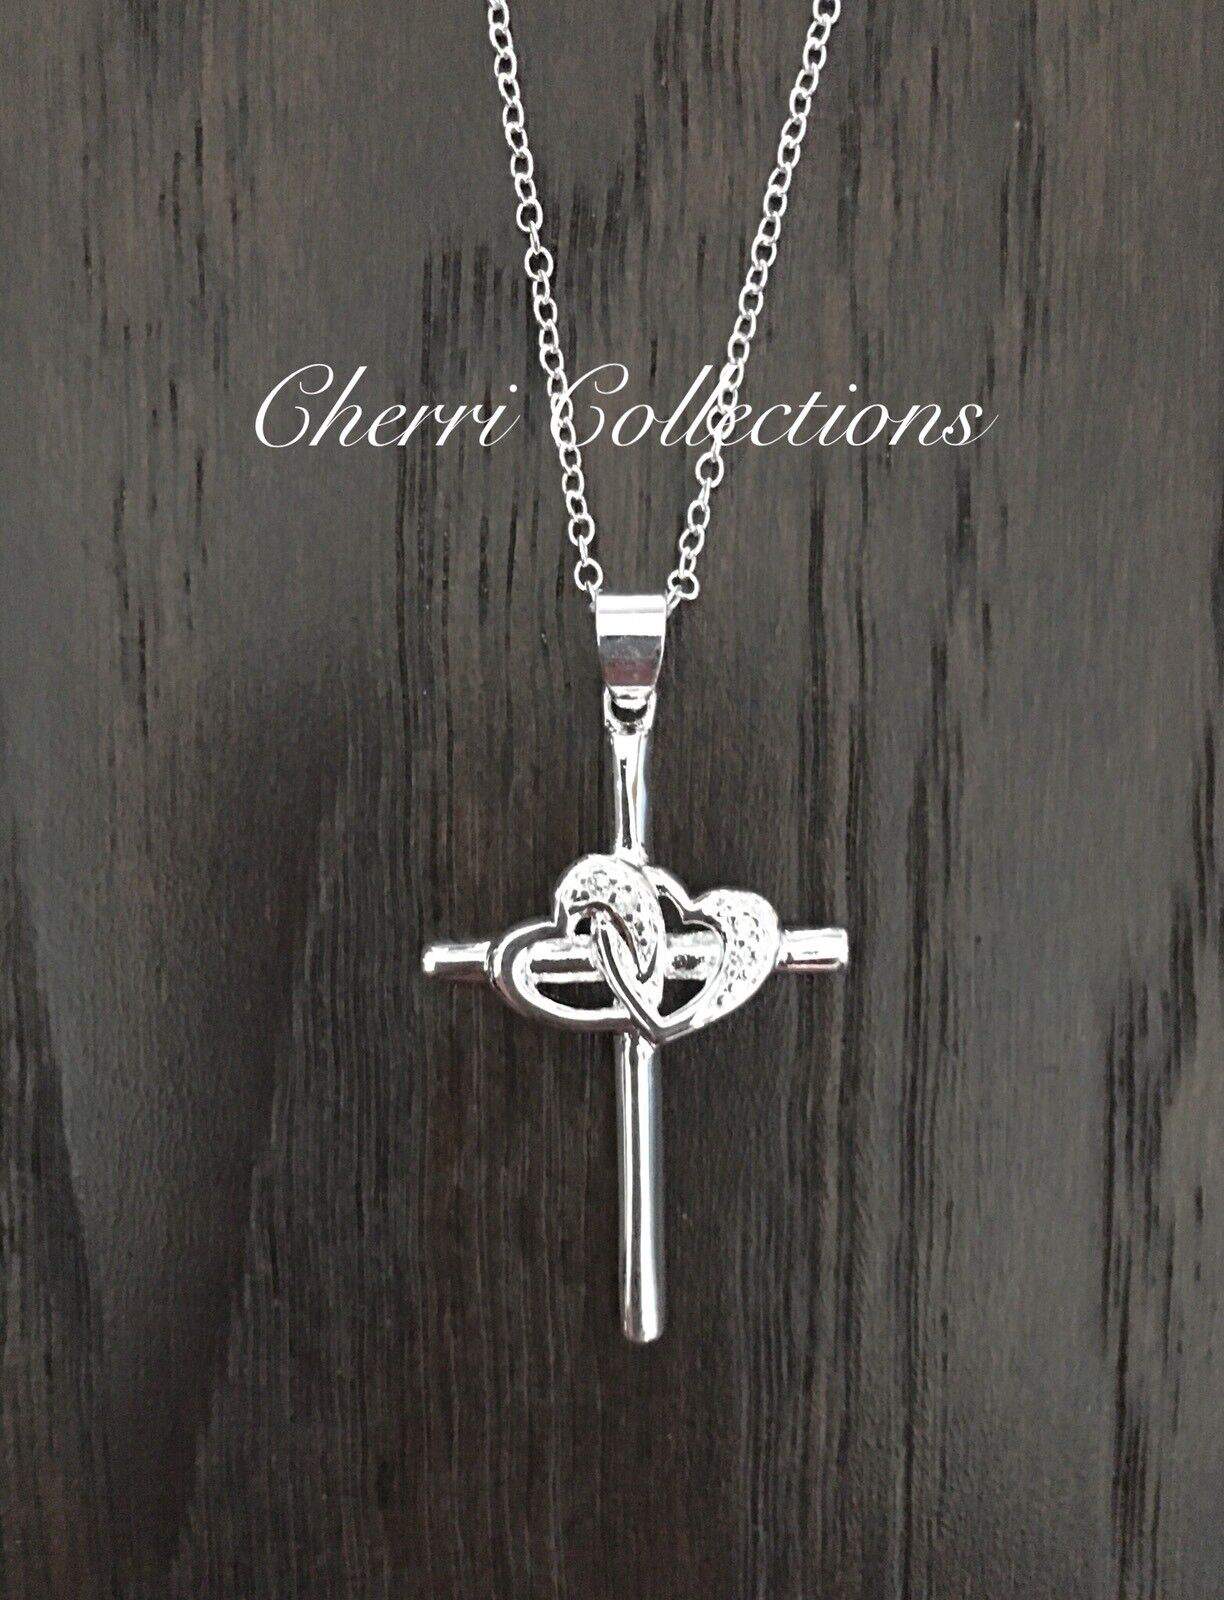 A silver cross necklace with a heart on it.